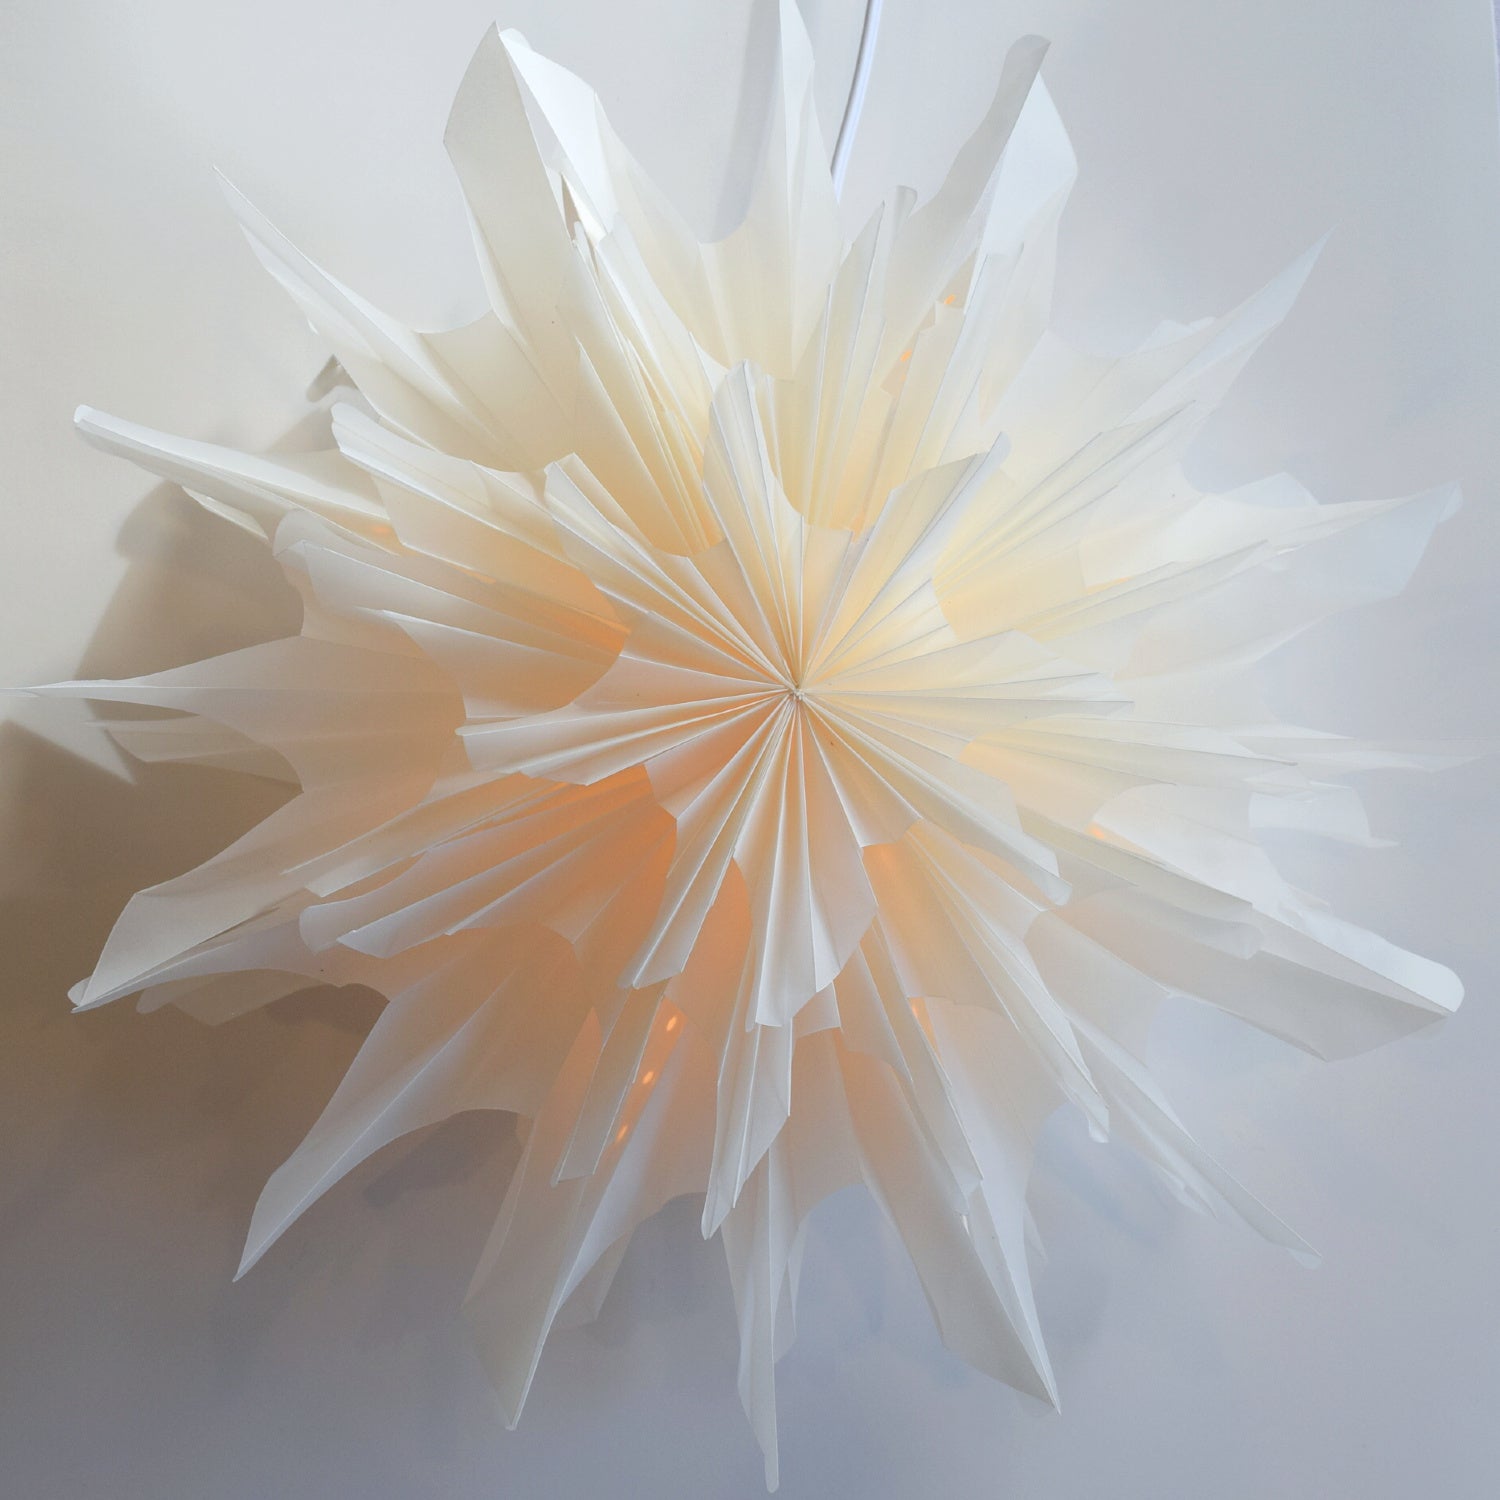 White Icicle Snowflake Star Lantern Pizzelle Design - Great With or Without Lights - Ideal for Holiday and Snowflake Decorations, Weddings, Parties, and Home Decor